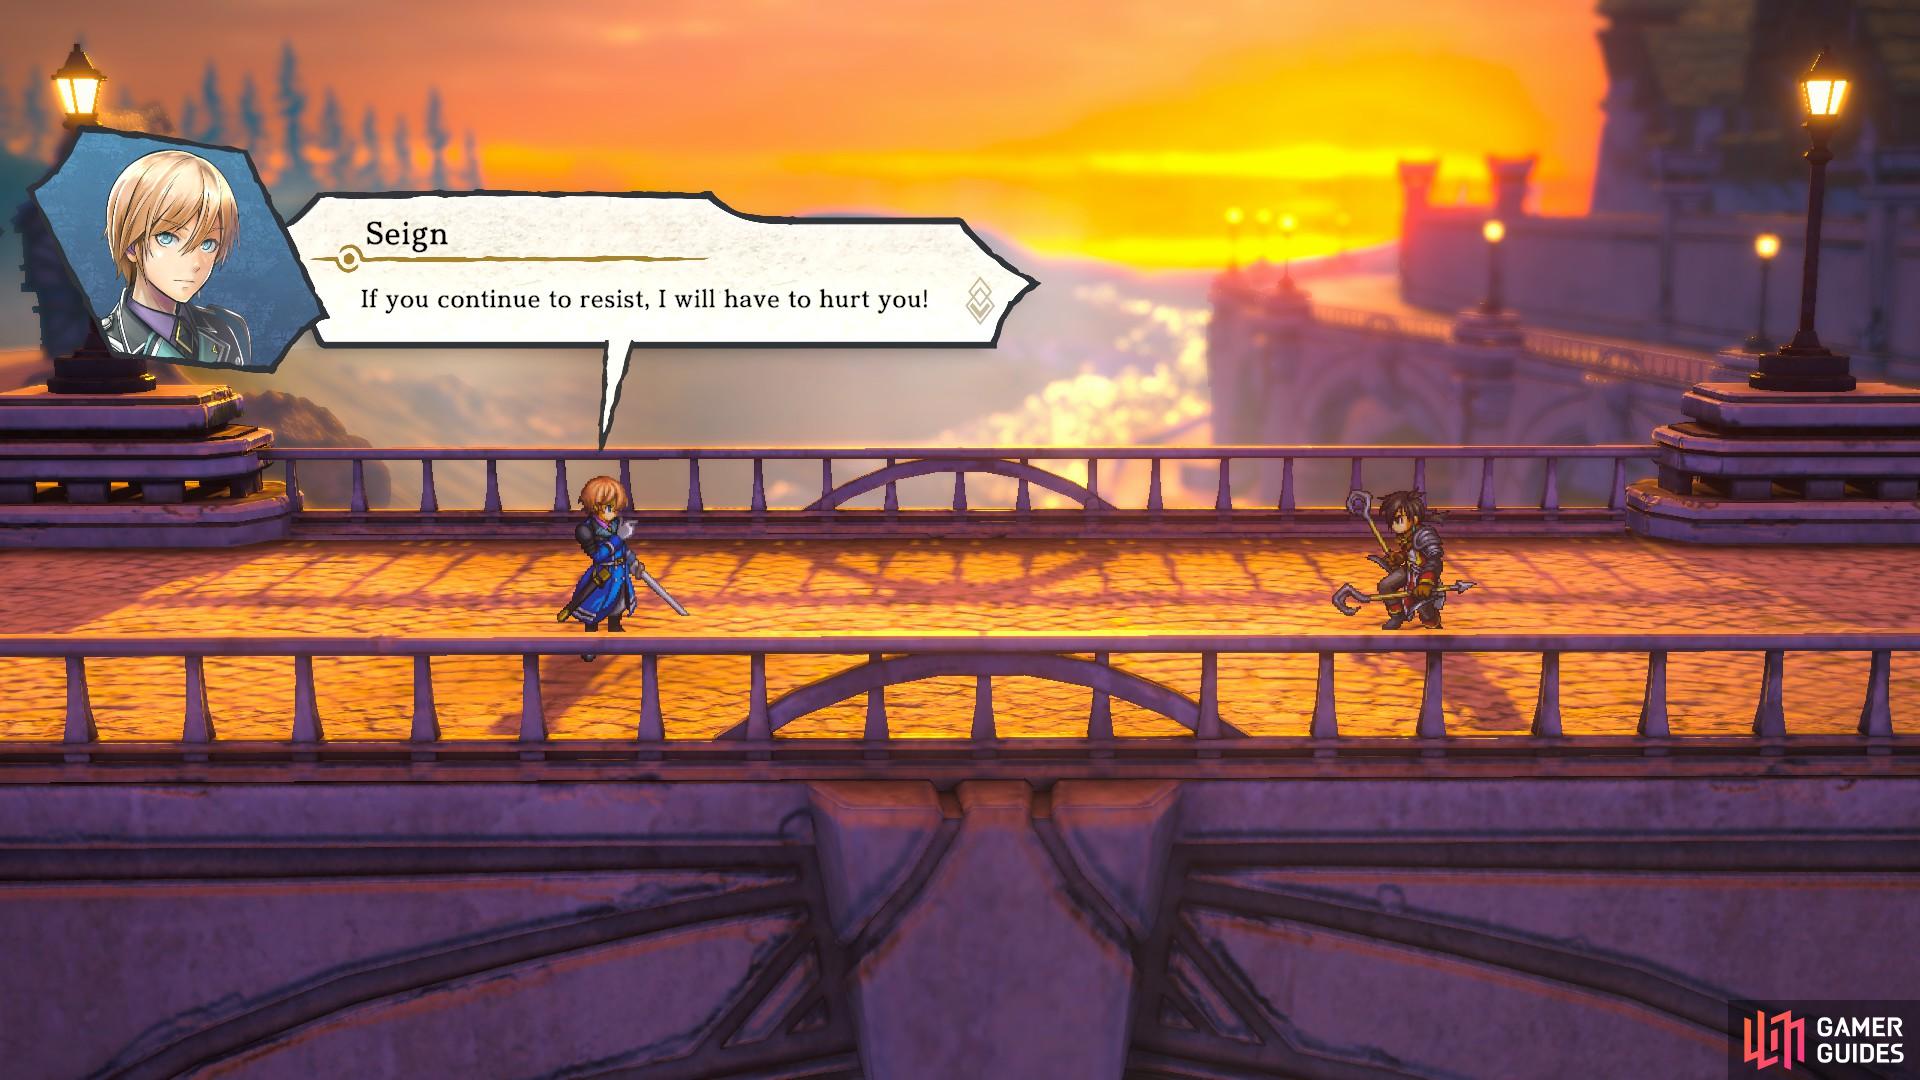 Seign and Nowa are forced to confront each other on the Eltisweiss bridge.